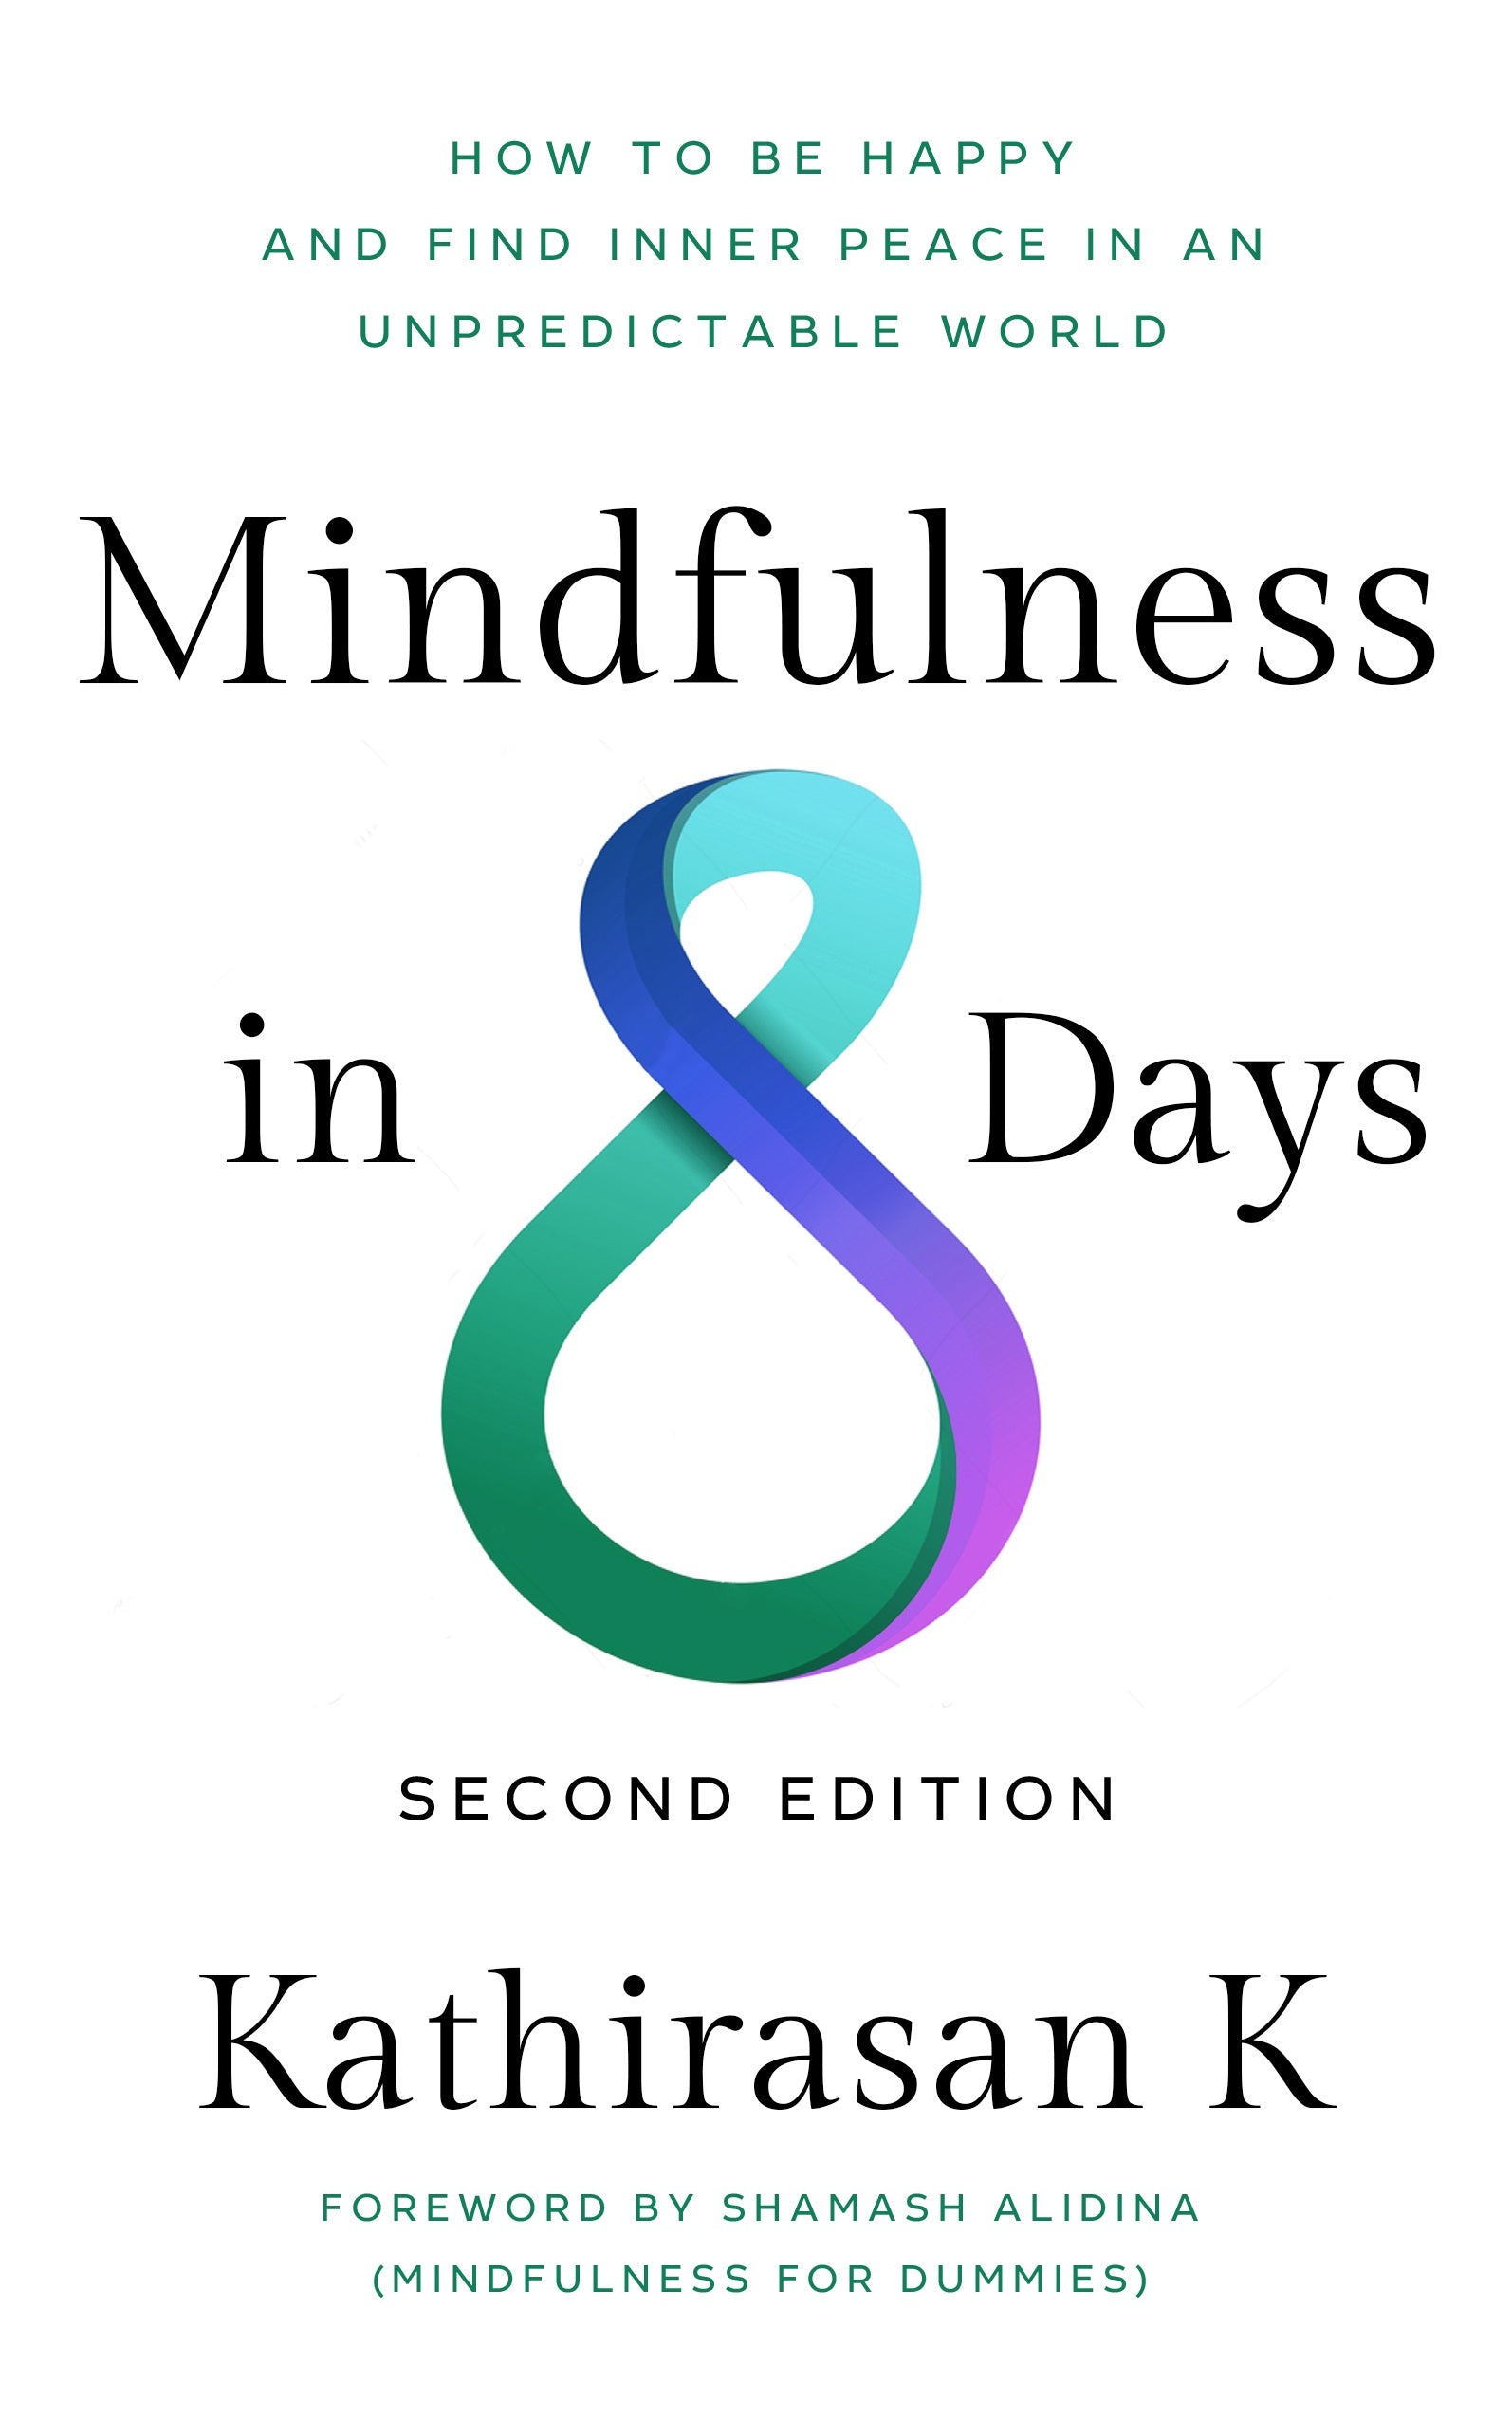 Mindfulness in 8 Days (Second Edition): How to be happy and find inner peace in an unpredictable world